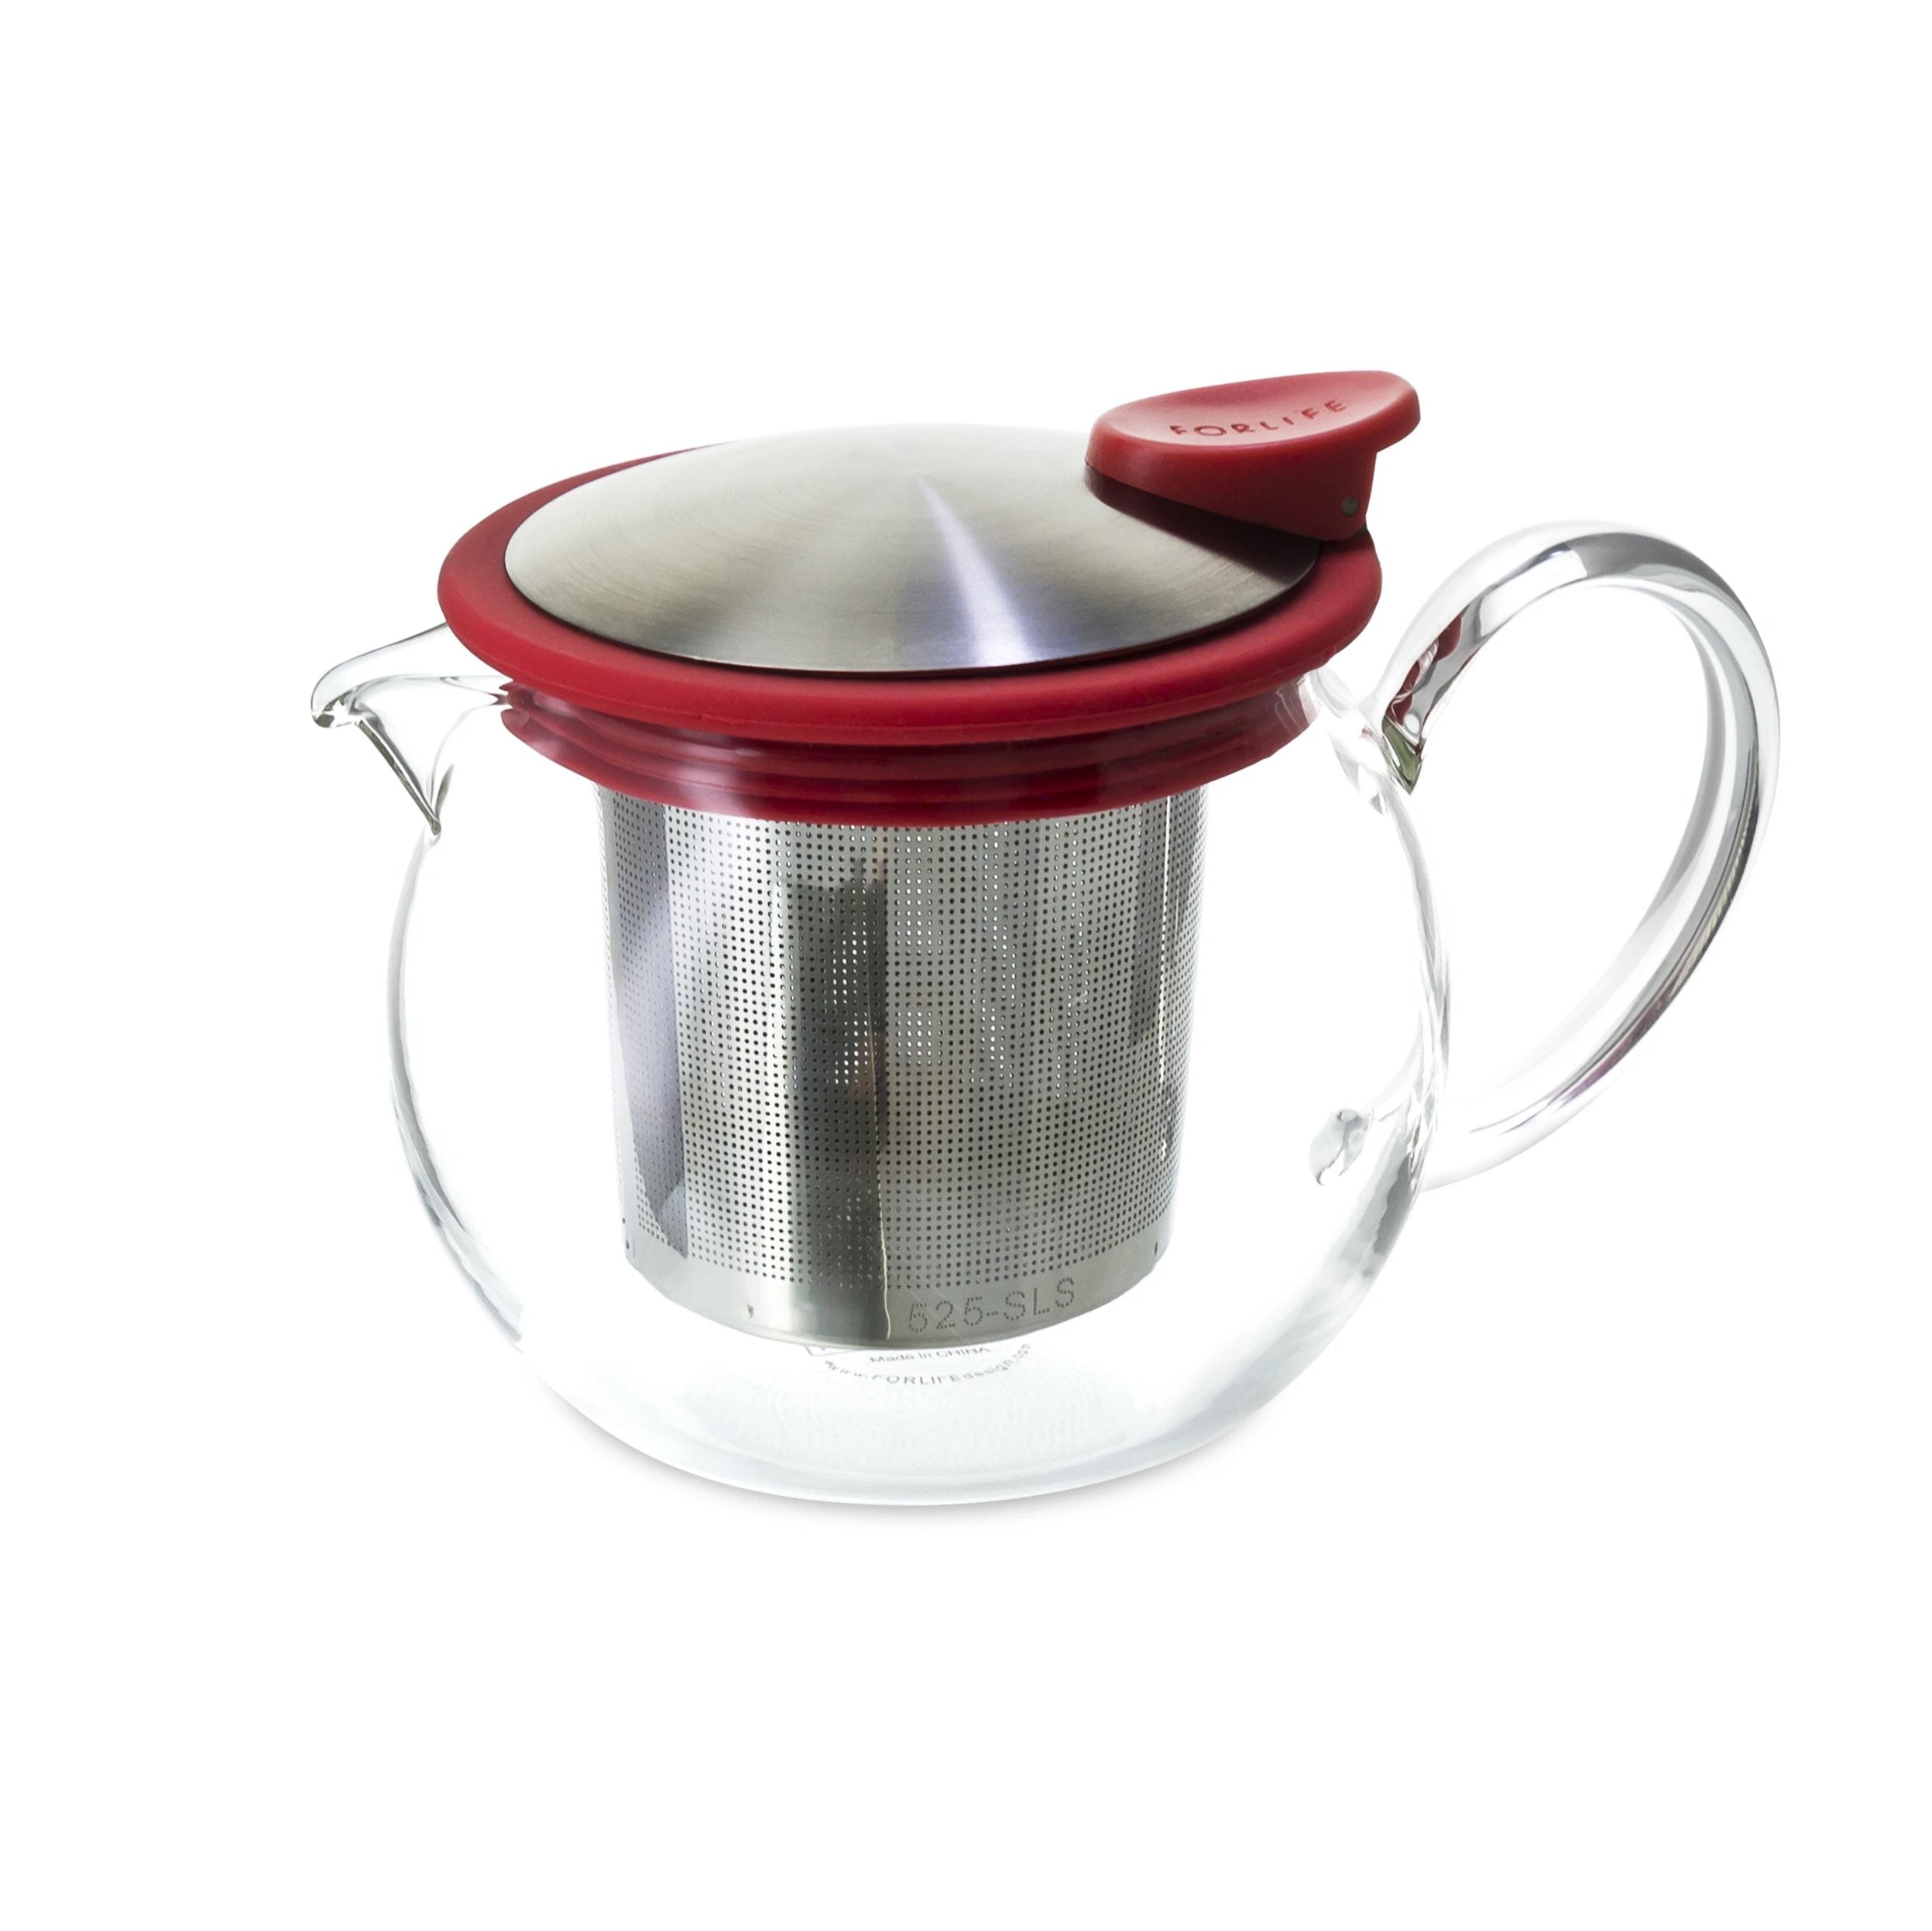 Radiance - Glass Tea Pot with Infuser